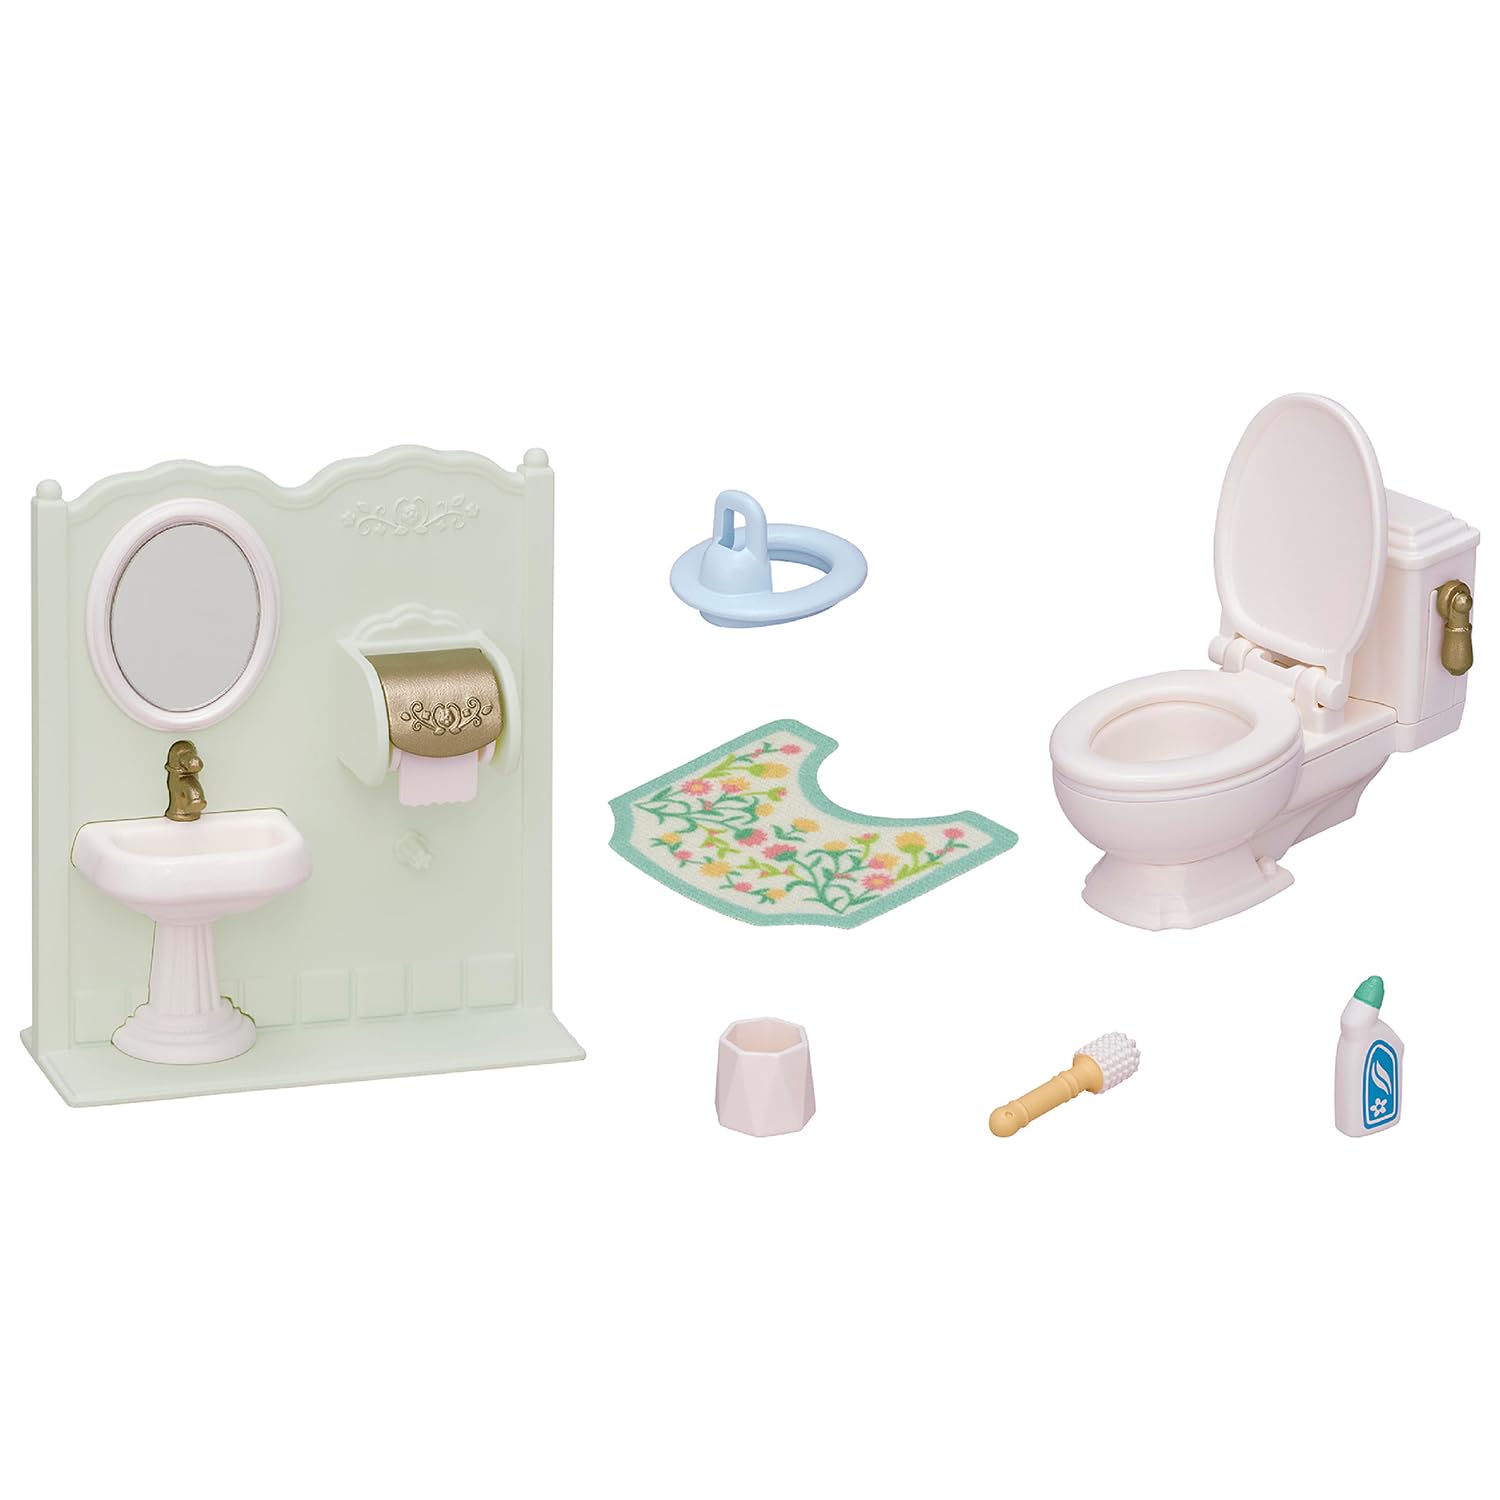 Calico Critters Toilet Set